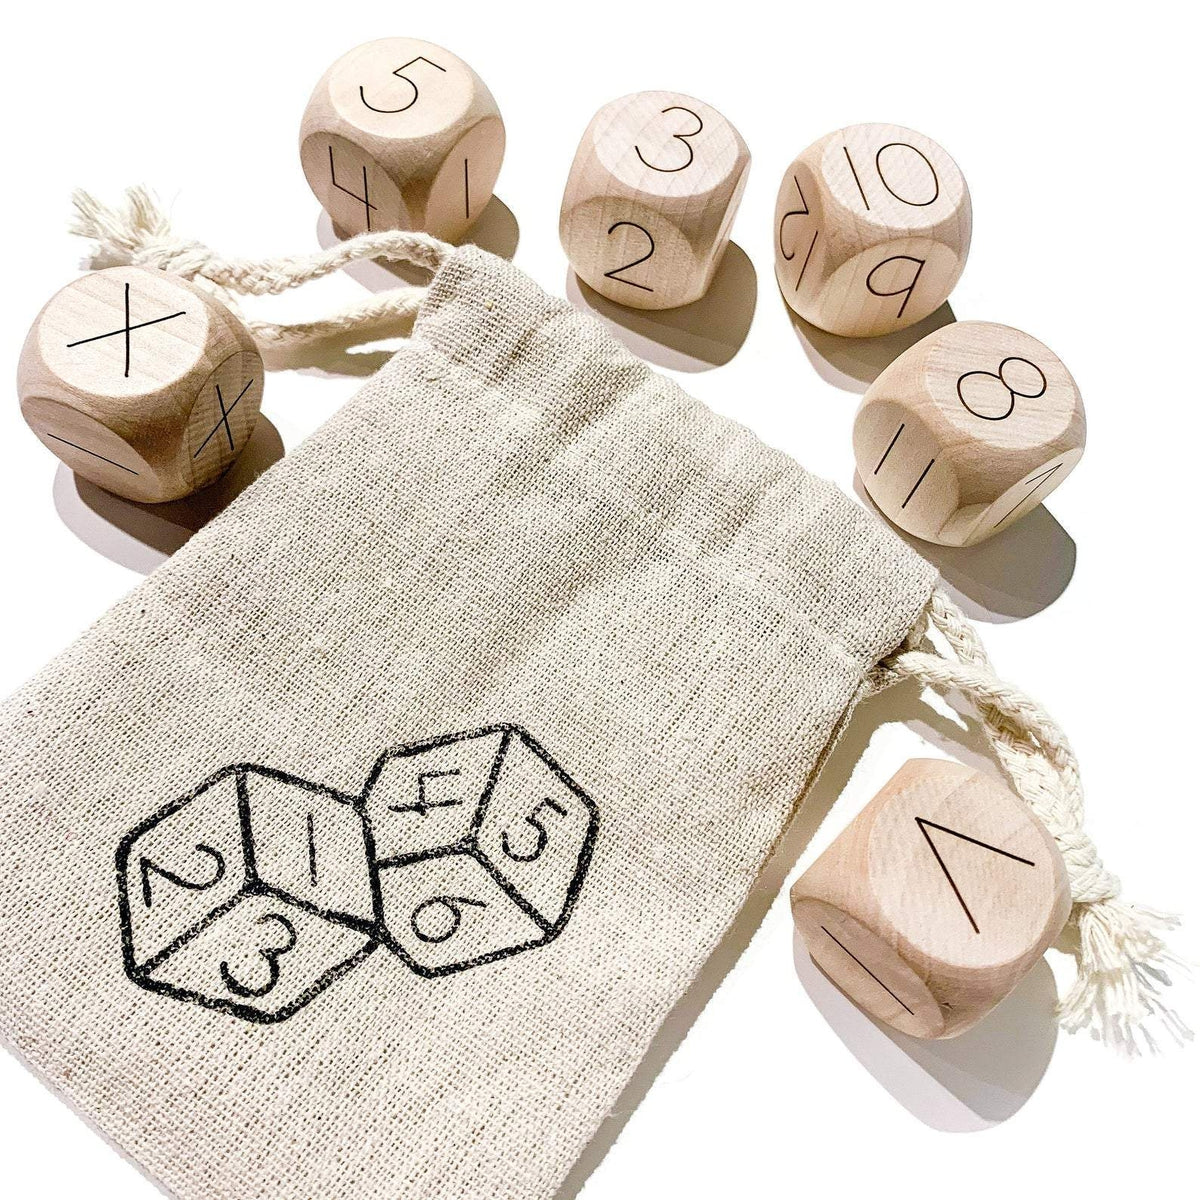 Zinsk 8-Pc Yoga Dice Set Showing 48 Poses Engraved Wooden Gift Storage Box